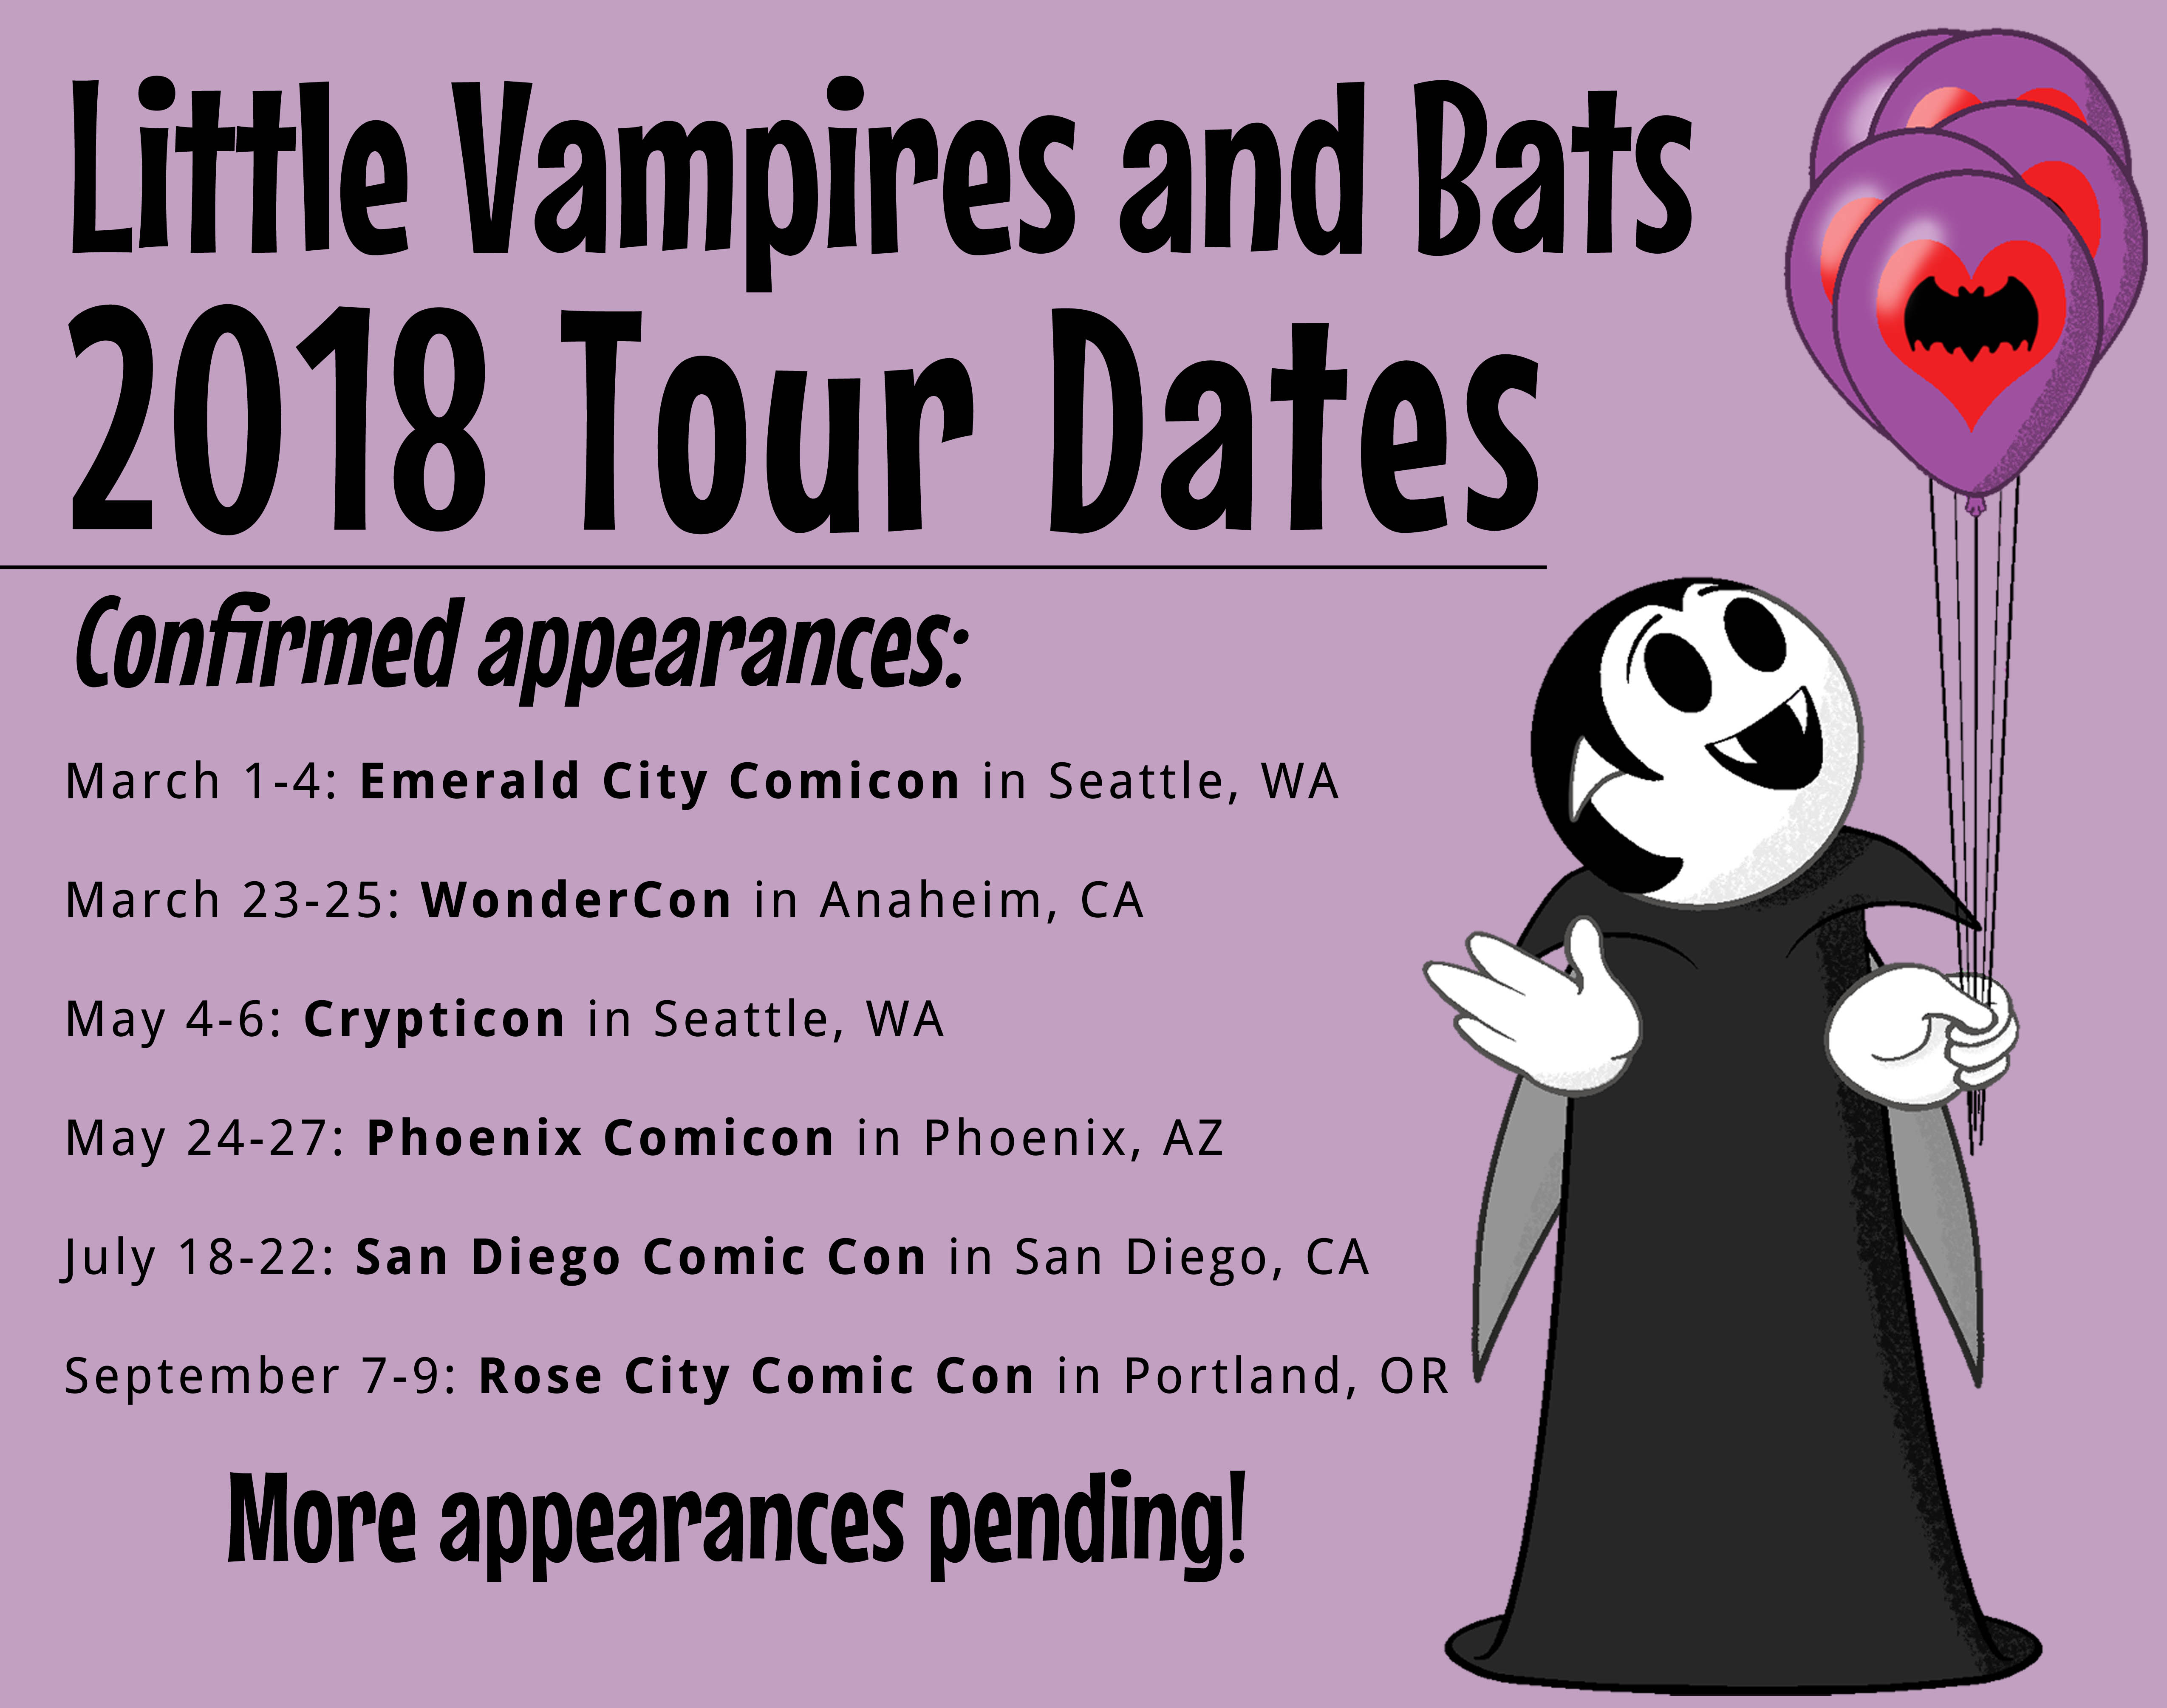 Little Vampires and Bats 2018 Tour Dates graphic